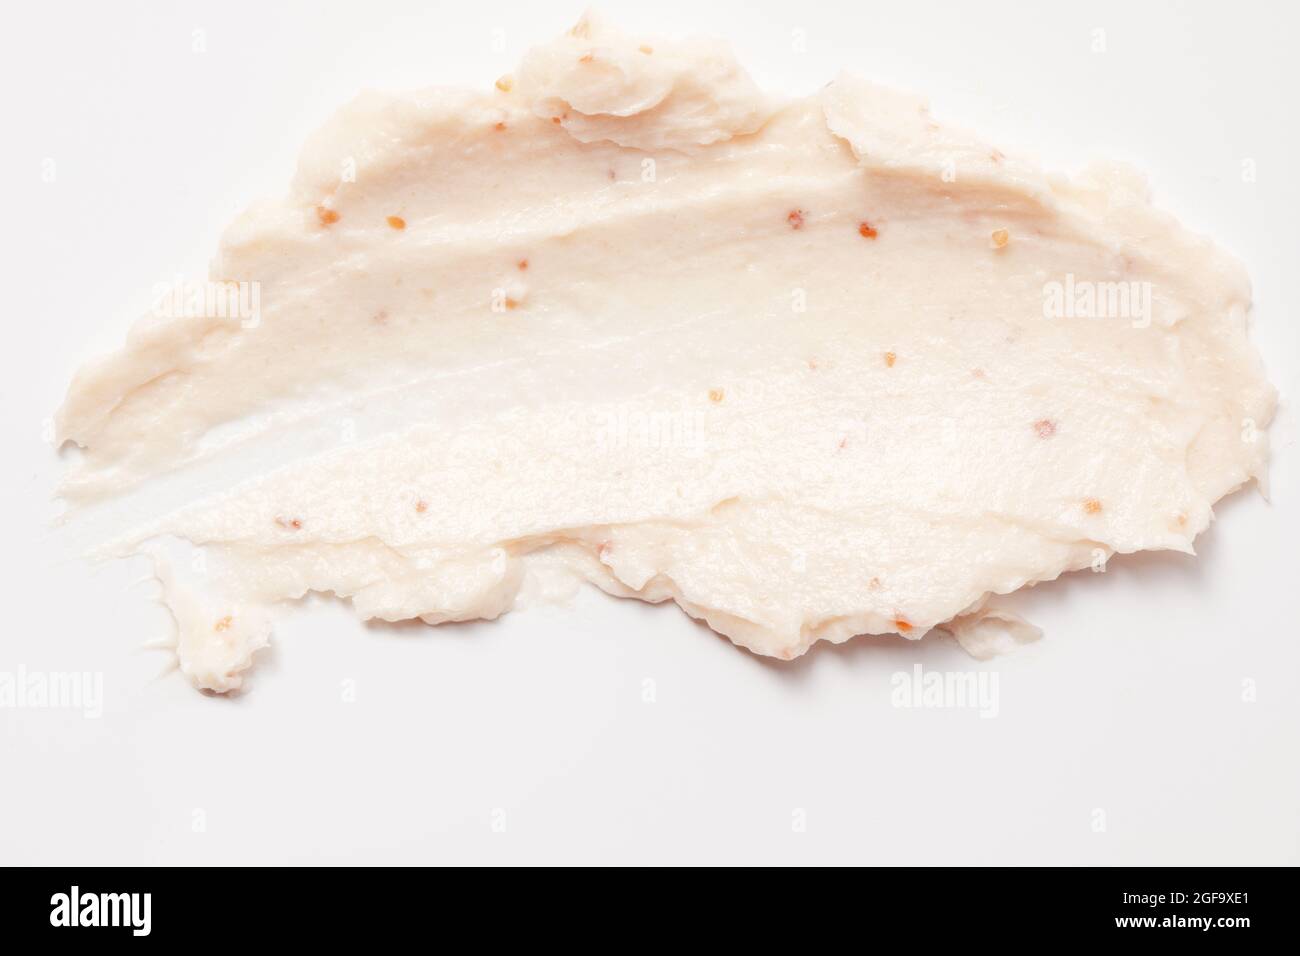 Face cream scrub texture background. Exfoliating skin care product swatch  smear smudge. Gentle creamy scrub cleanser sample close up Stock Photo -  Alamy